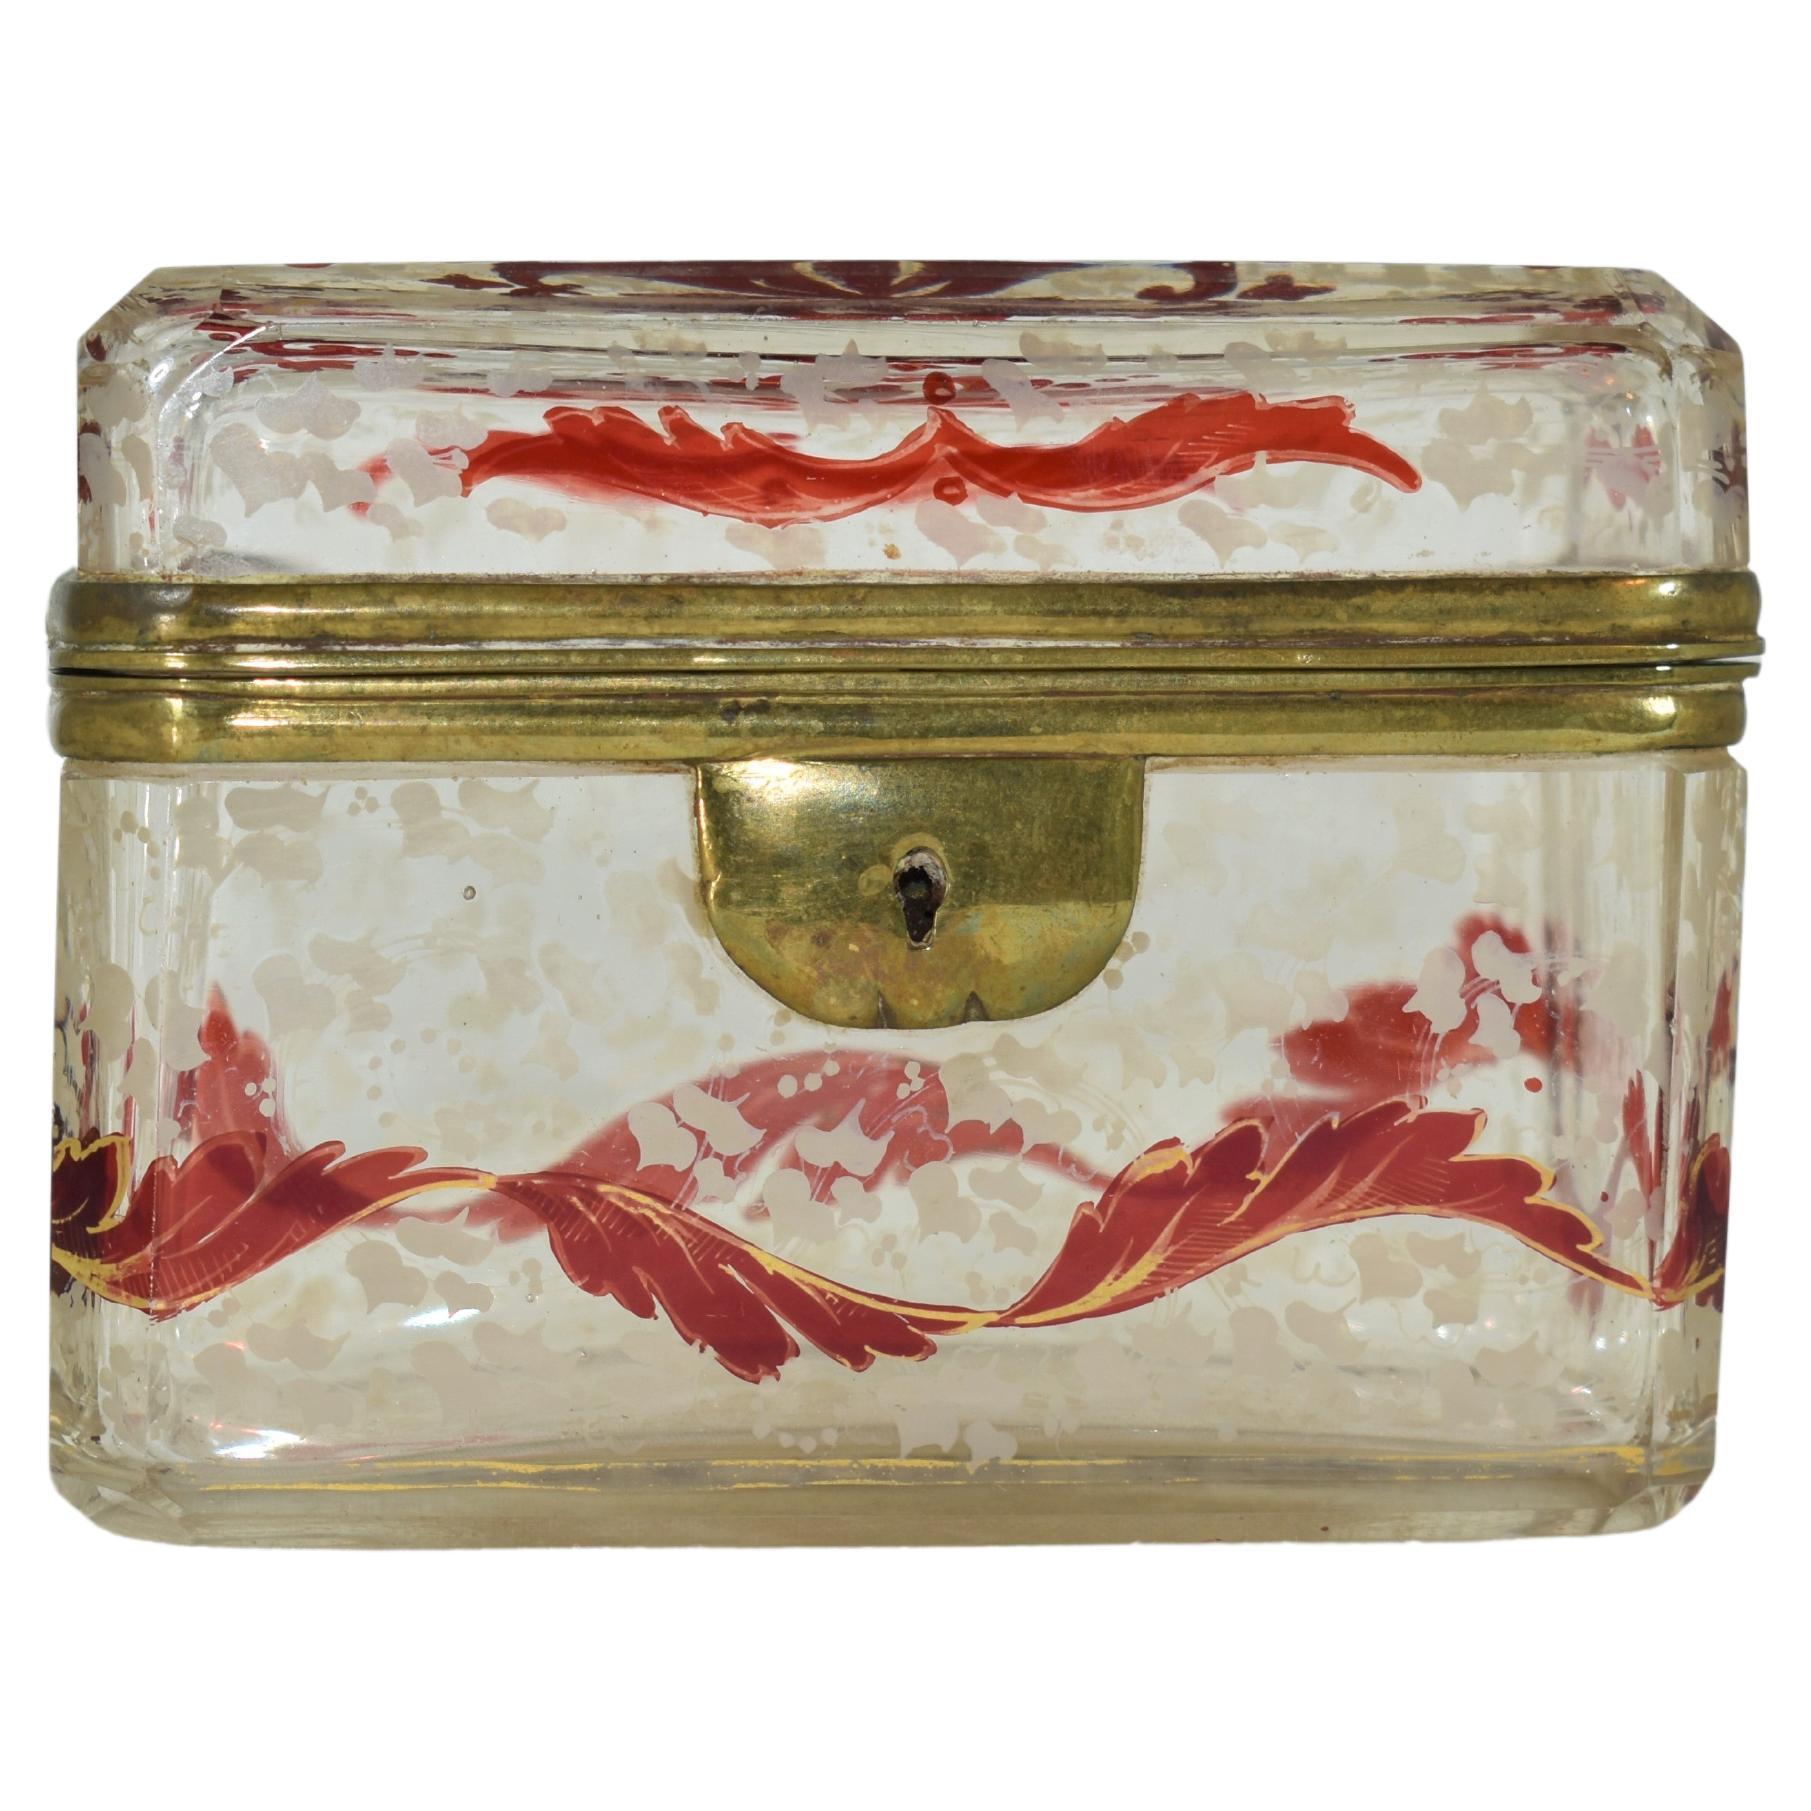 An extraordinary jewelery casket box made of clear glass with ruby decoration
Decorated all around with gilded ruby and white enamel and gilding highlights
Bohemia, 19th century.